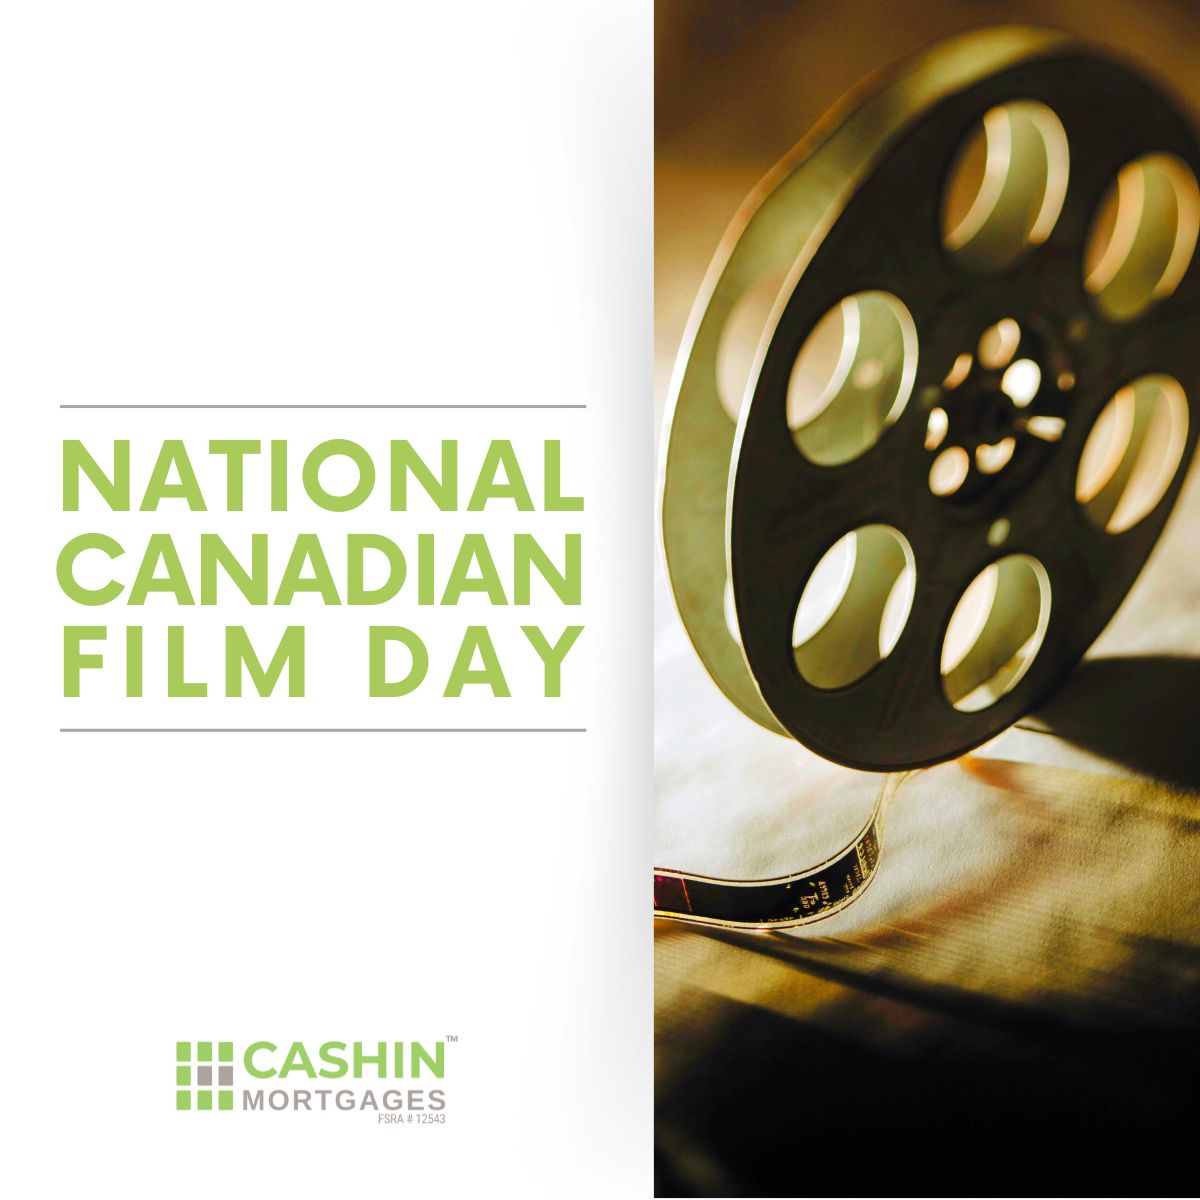 Lights, Camera, Action! Today, it's National Canadian Film Day! 🎬 
From comedies to dramas, Canadian cinema reflects our cultural heritage. Grab popcorn and let's celebrate storytelling's magic and film's power to unite! #NationalCanadianFilmDay #CanadianCinema #CanadianFilmDay